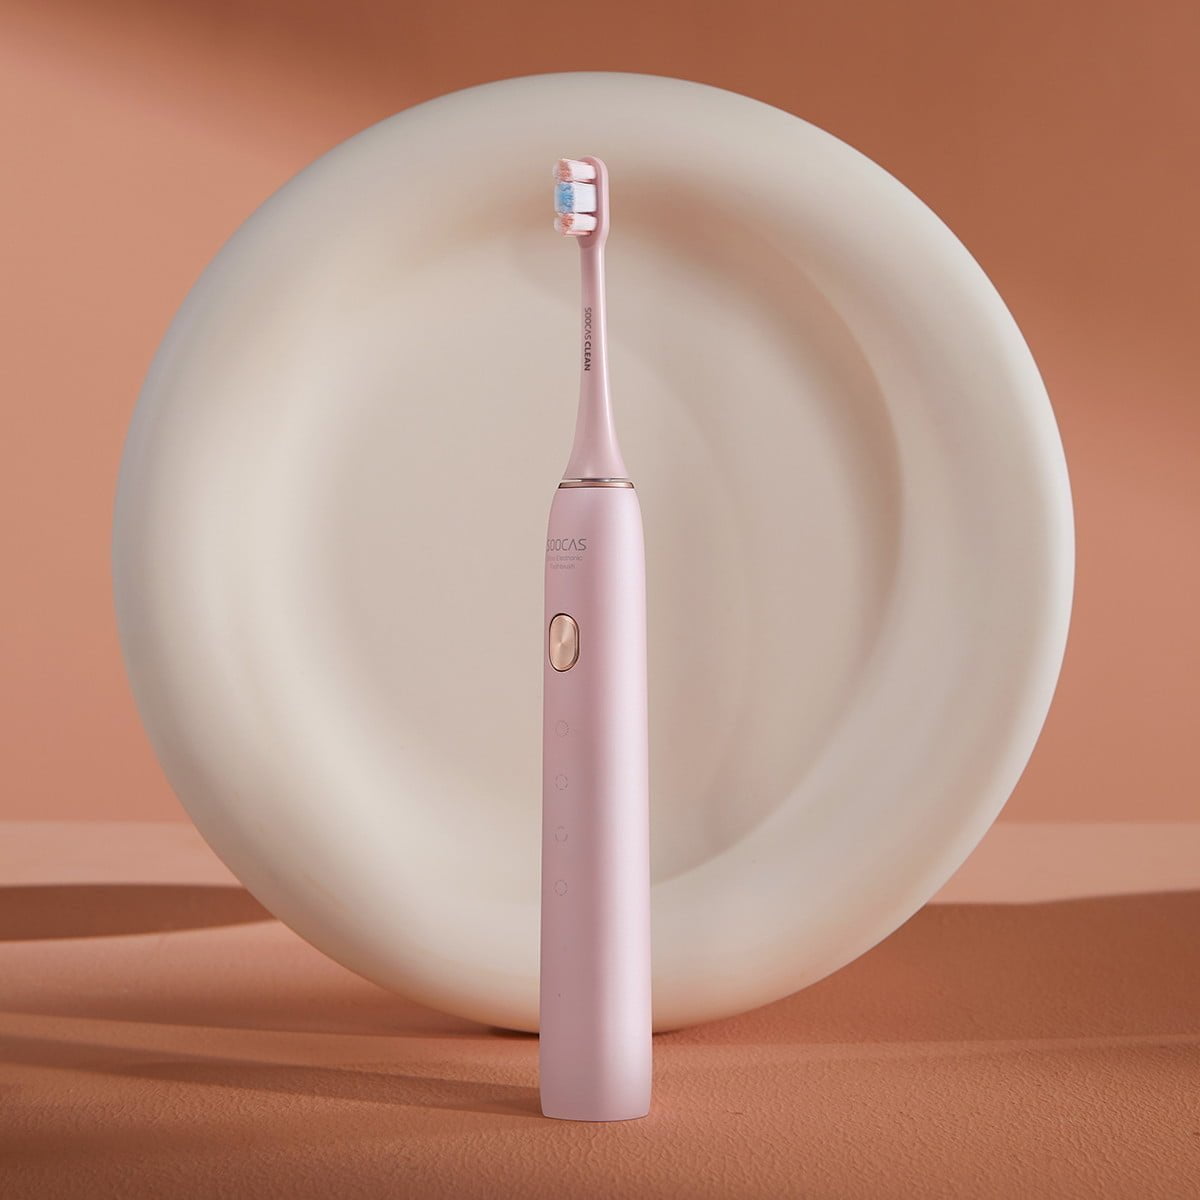 2B60E8Eb Af91 4475 A8C0 Ebeafb65F098 Xiaomi Xiaomi Toothbrush Soocare X3U, Soocas Upgraded Electric Sonic Vibration Waterproof Lightning-Fast Charging 2020 Newest Version [Video Width=&Quot;1280&Quot; Height=&Quot;720&Quot; Mp4=&Quot;Https://Lablaab.com/Wp-Content/Uploads/2020/05/Khn4Gzxy4Rcnwtethdd__Hd.mp4&Quot;][/Video] Soocas X3U Sonic Toothbrush Electric (White) 2020 Model